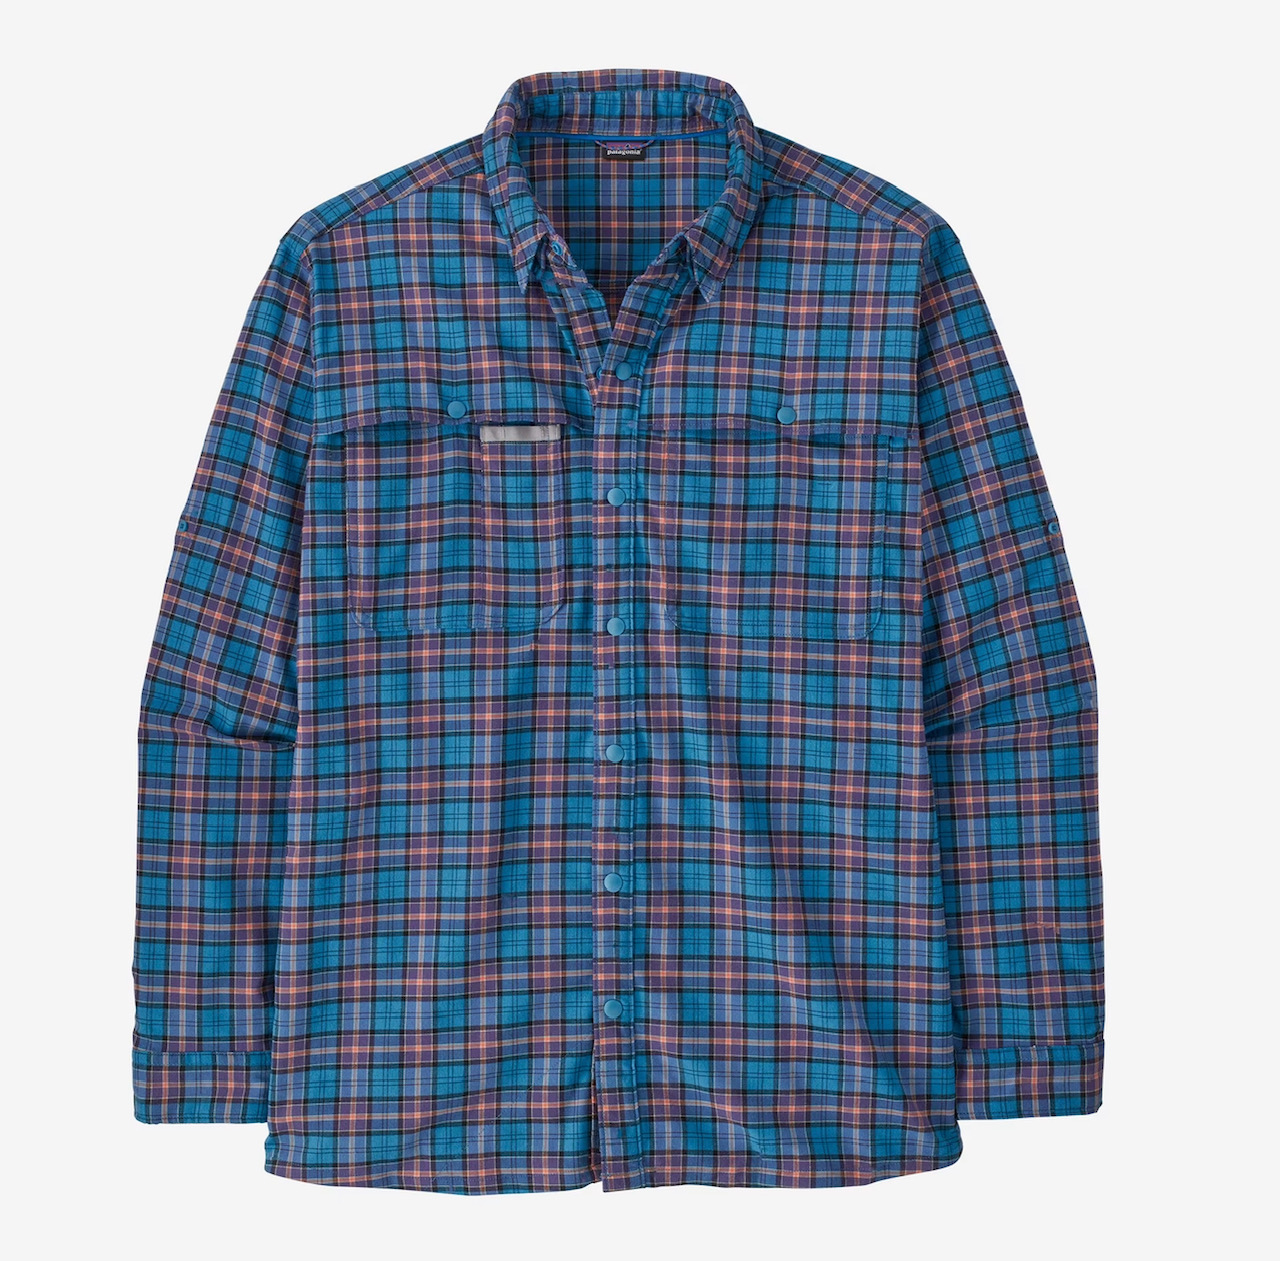 Patagonia M's Early Rise Stretch Shirt - On the Fly: Anacapa Blue - Large